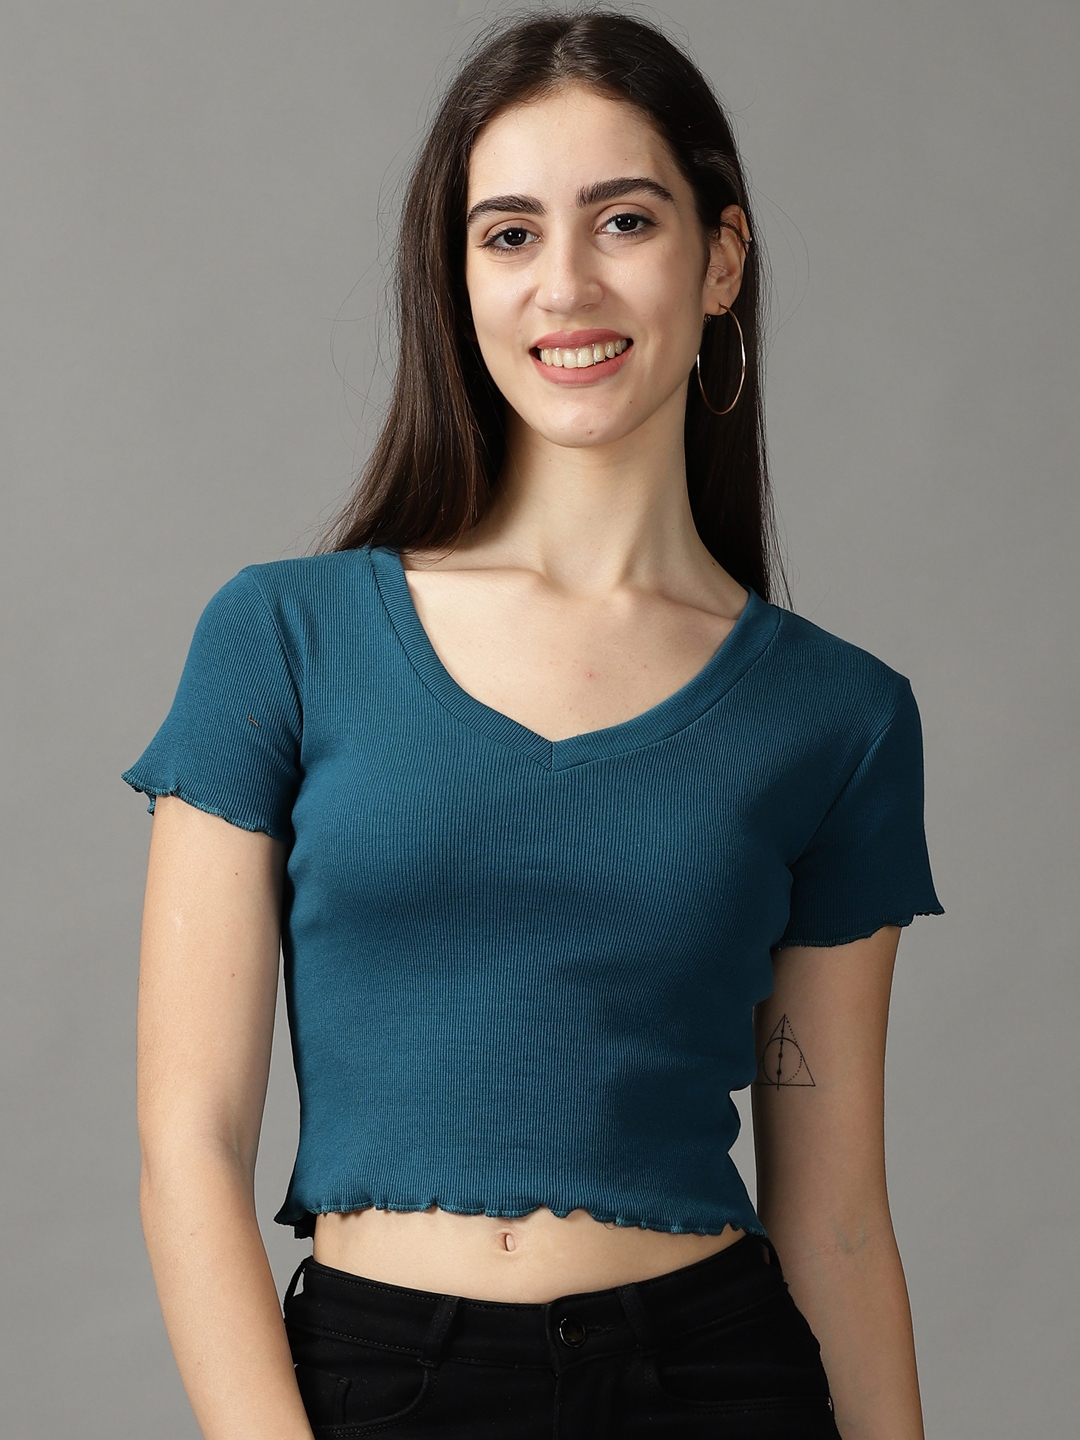 Women's Blue Polycotton Solid Tops